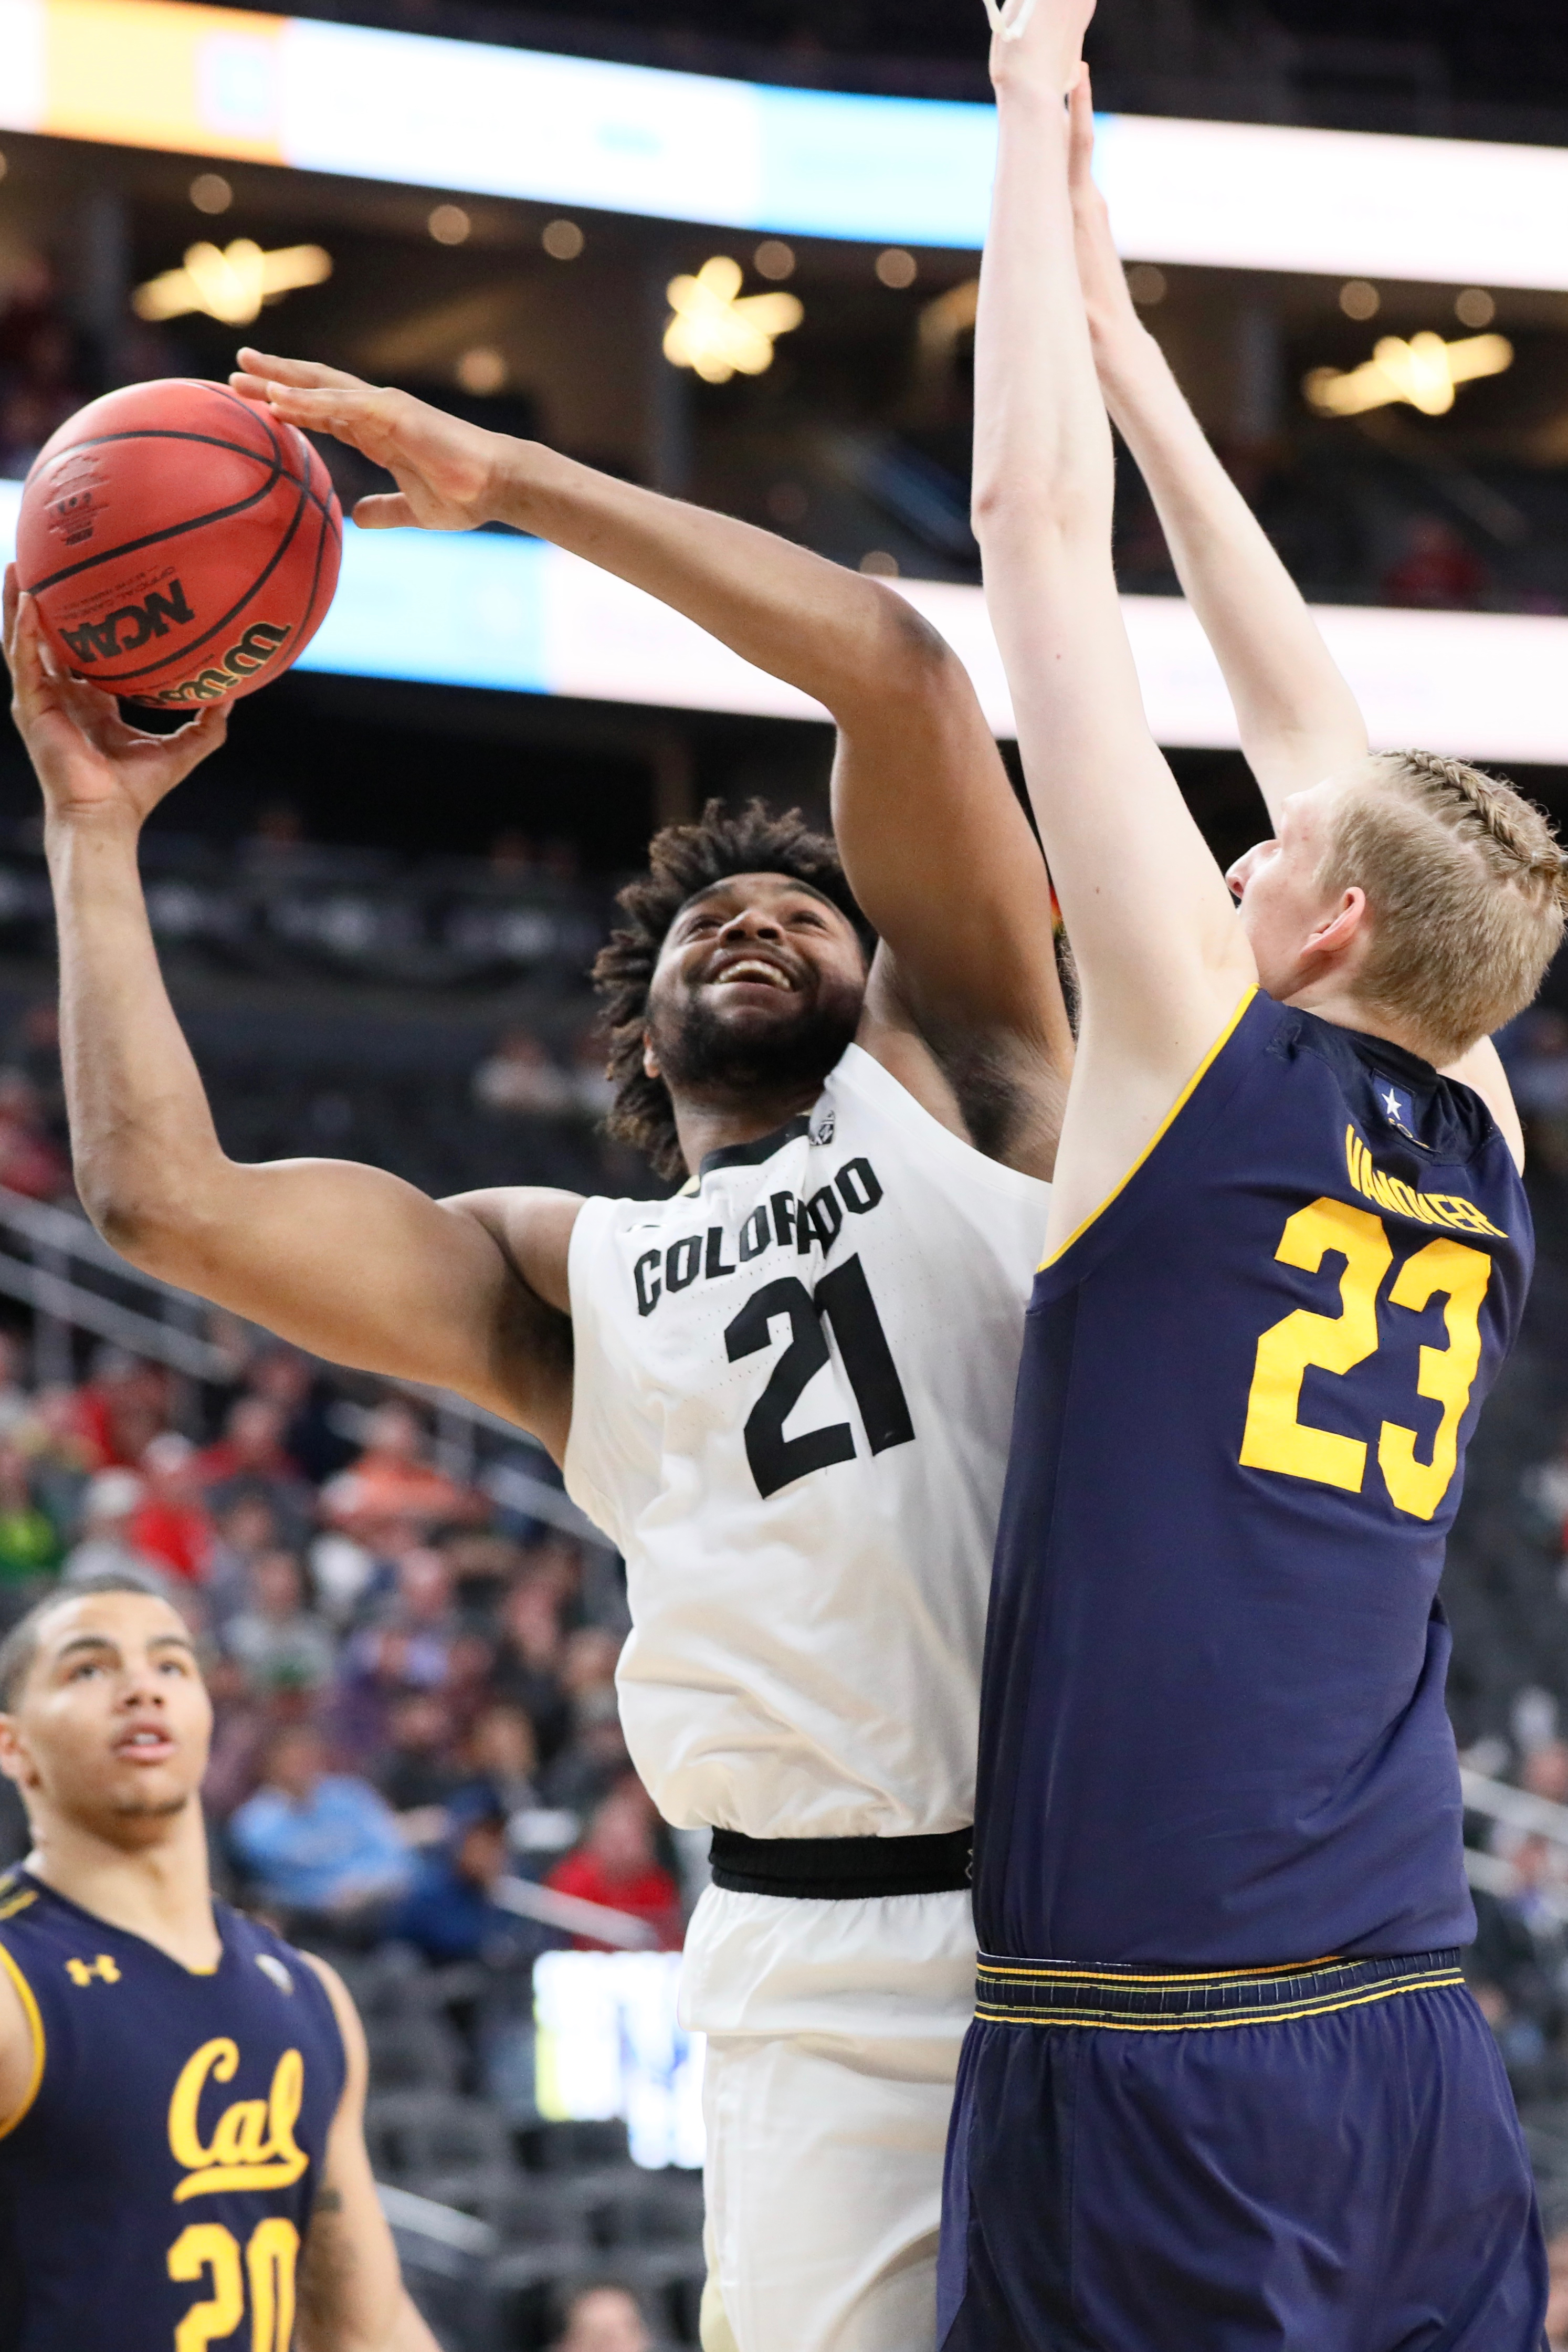 Buffs outlast Cal, eek out 56-51 win in first round of Pac-12 Tourney